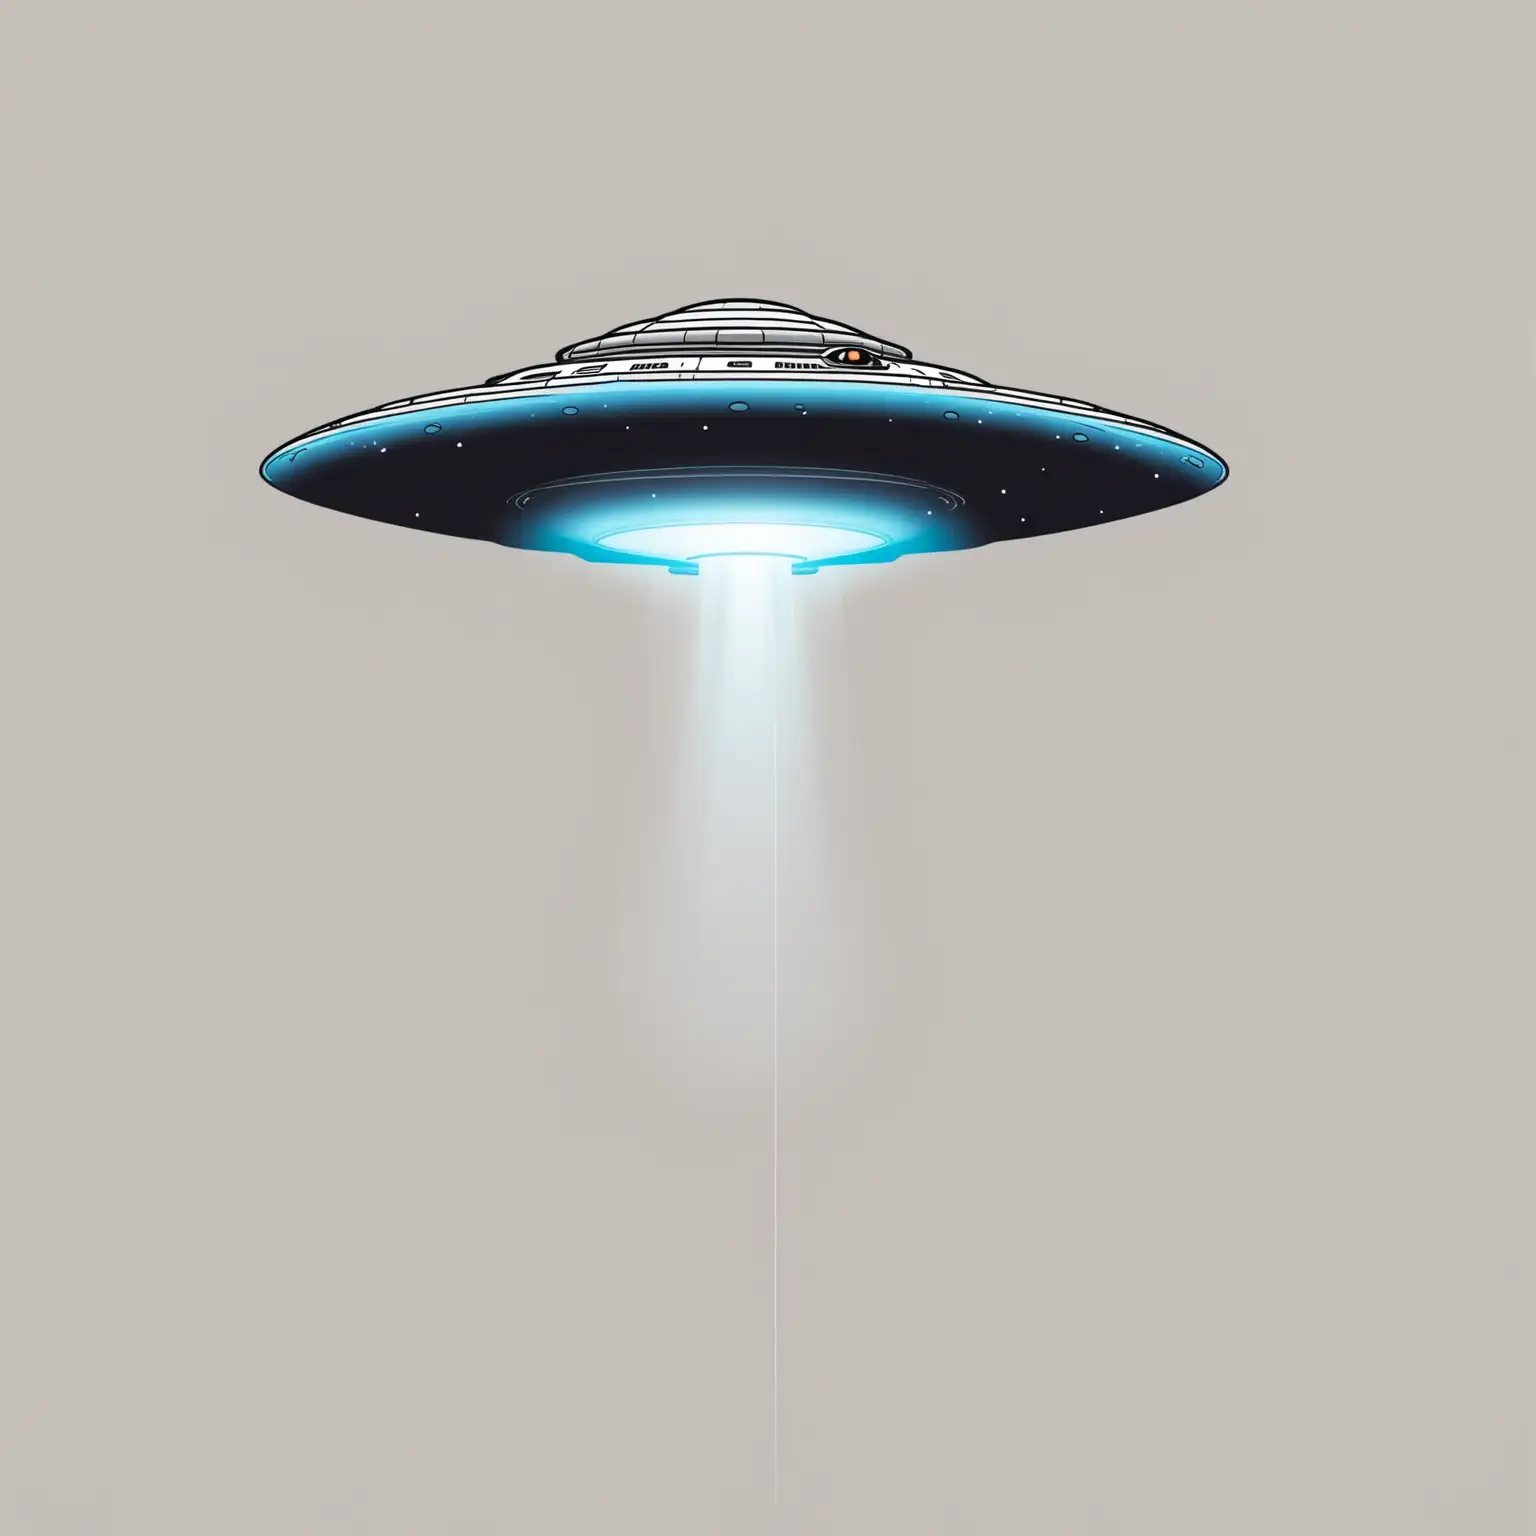 UFO Flying Silently in Clear Skies